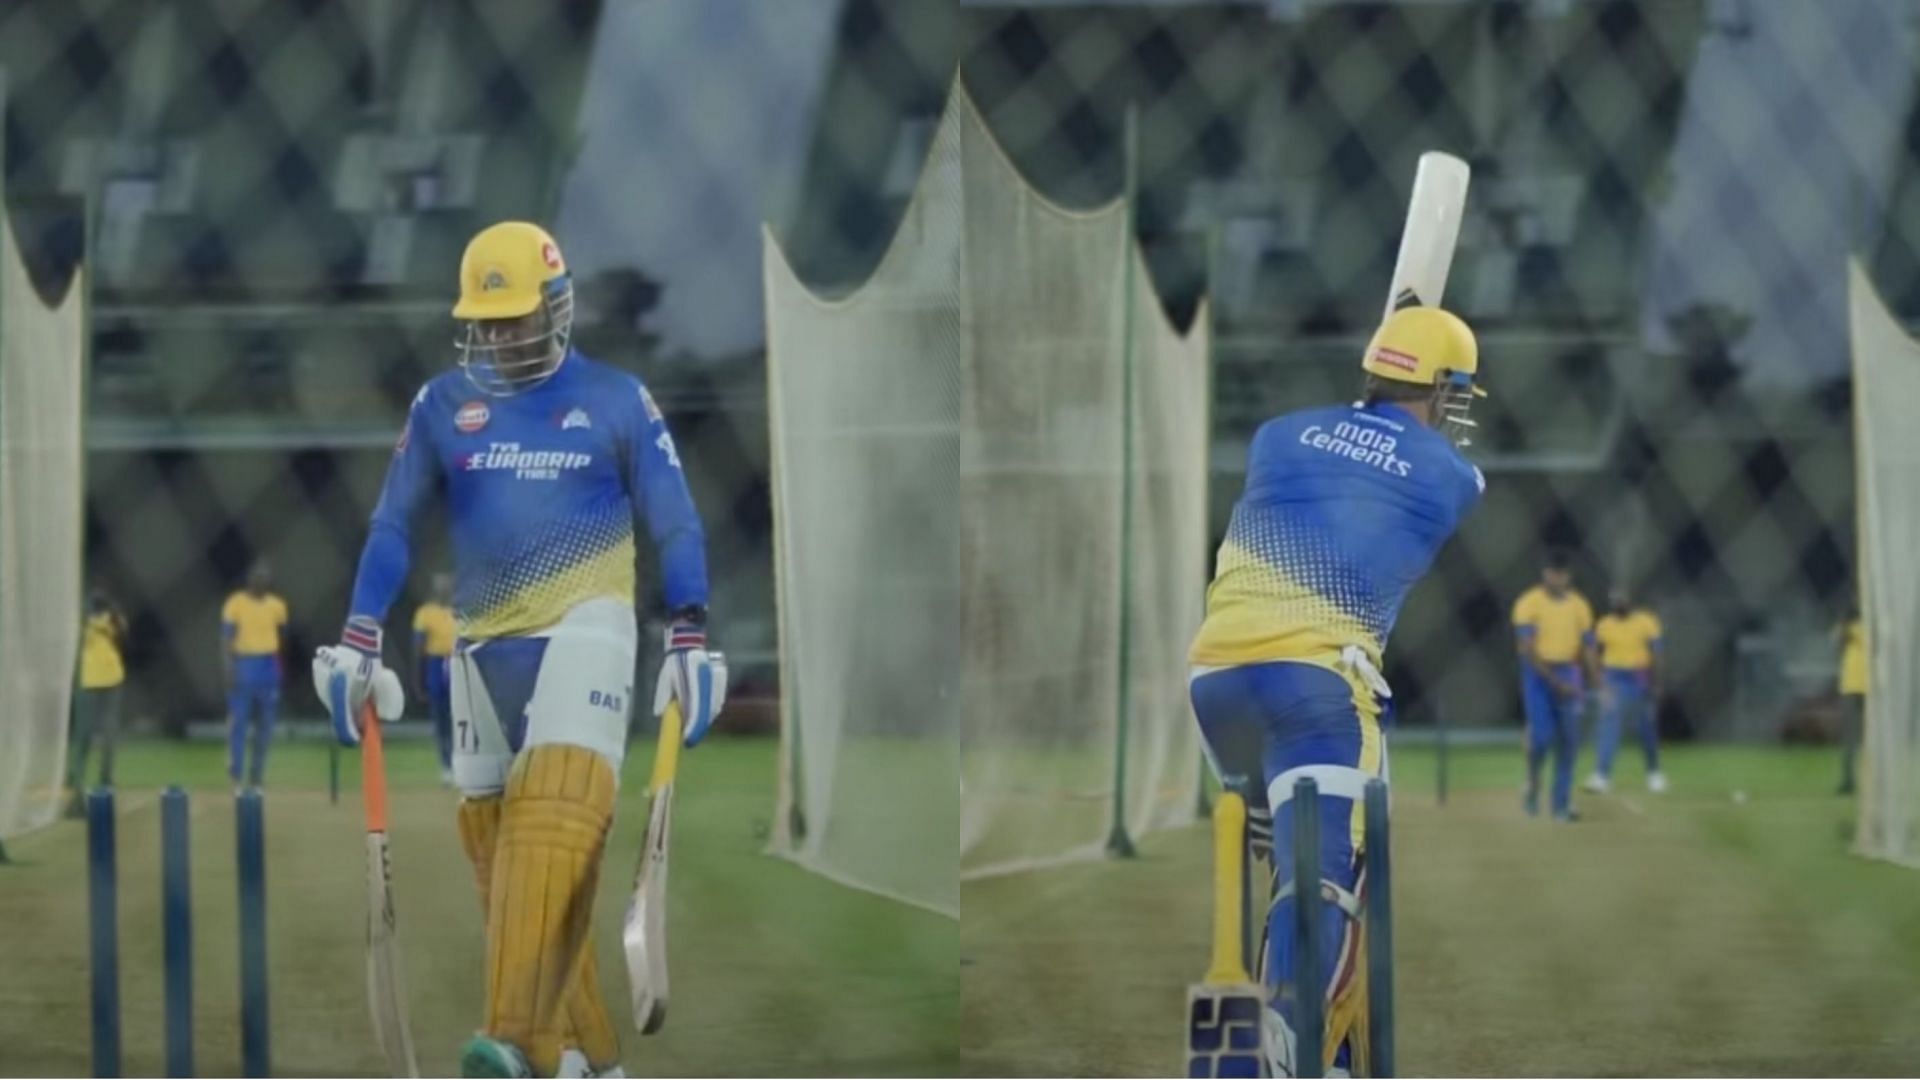 MS Dhoni practiced his shots in the nets (Image: CSK/Instagram)